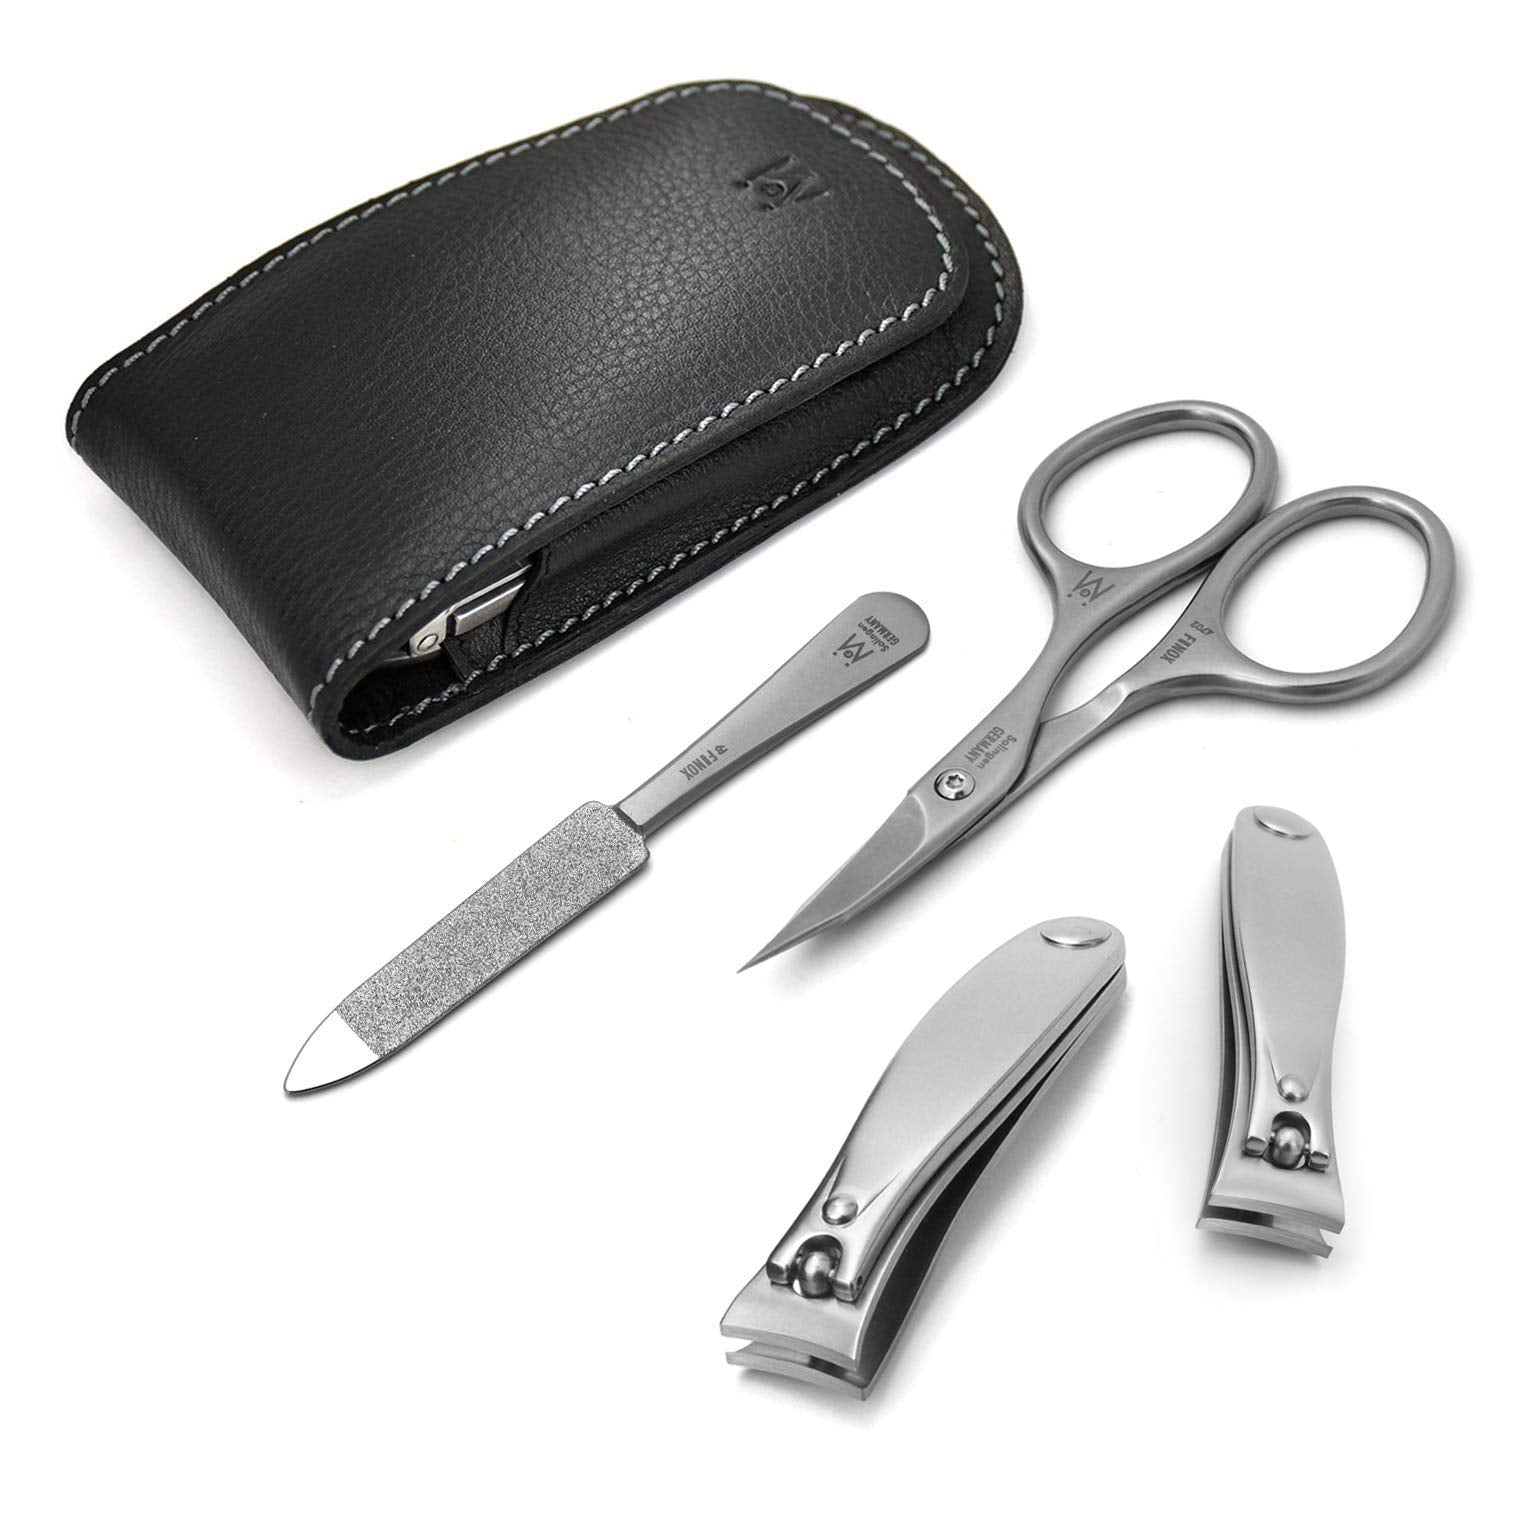 4 Piece Manicure Set in Black Leather Case: 2 Nail Clippers, Cuticle Scissor, and Sapphire Nail File